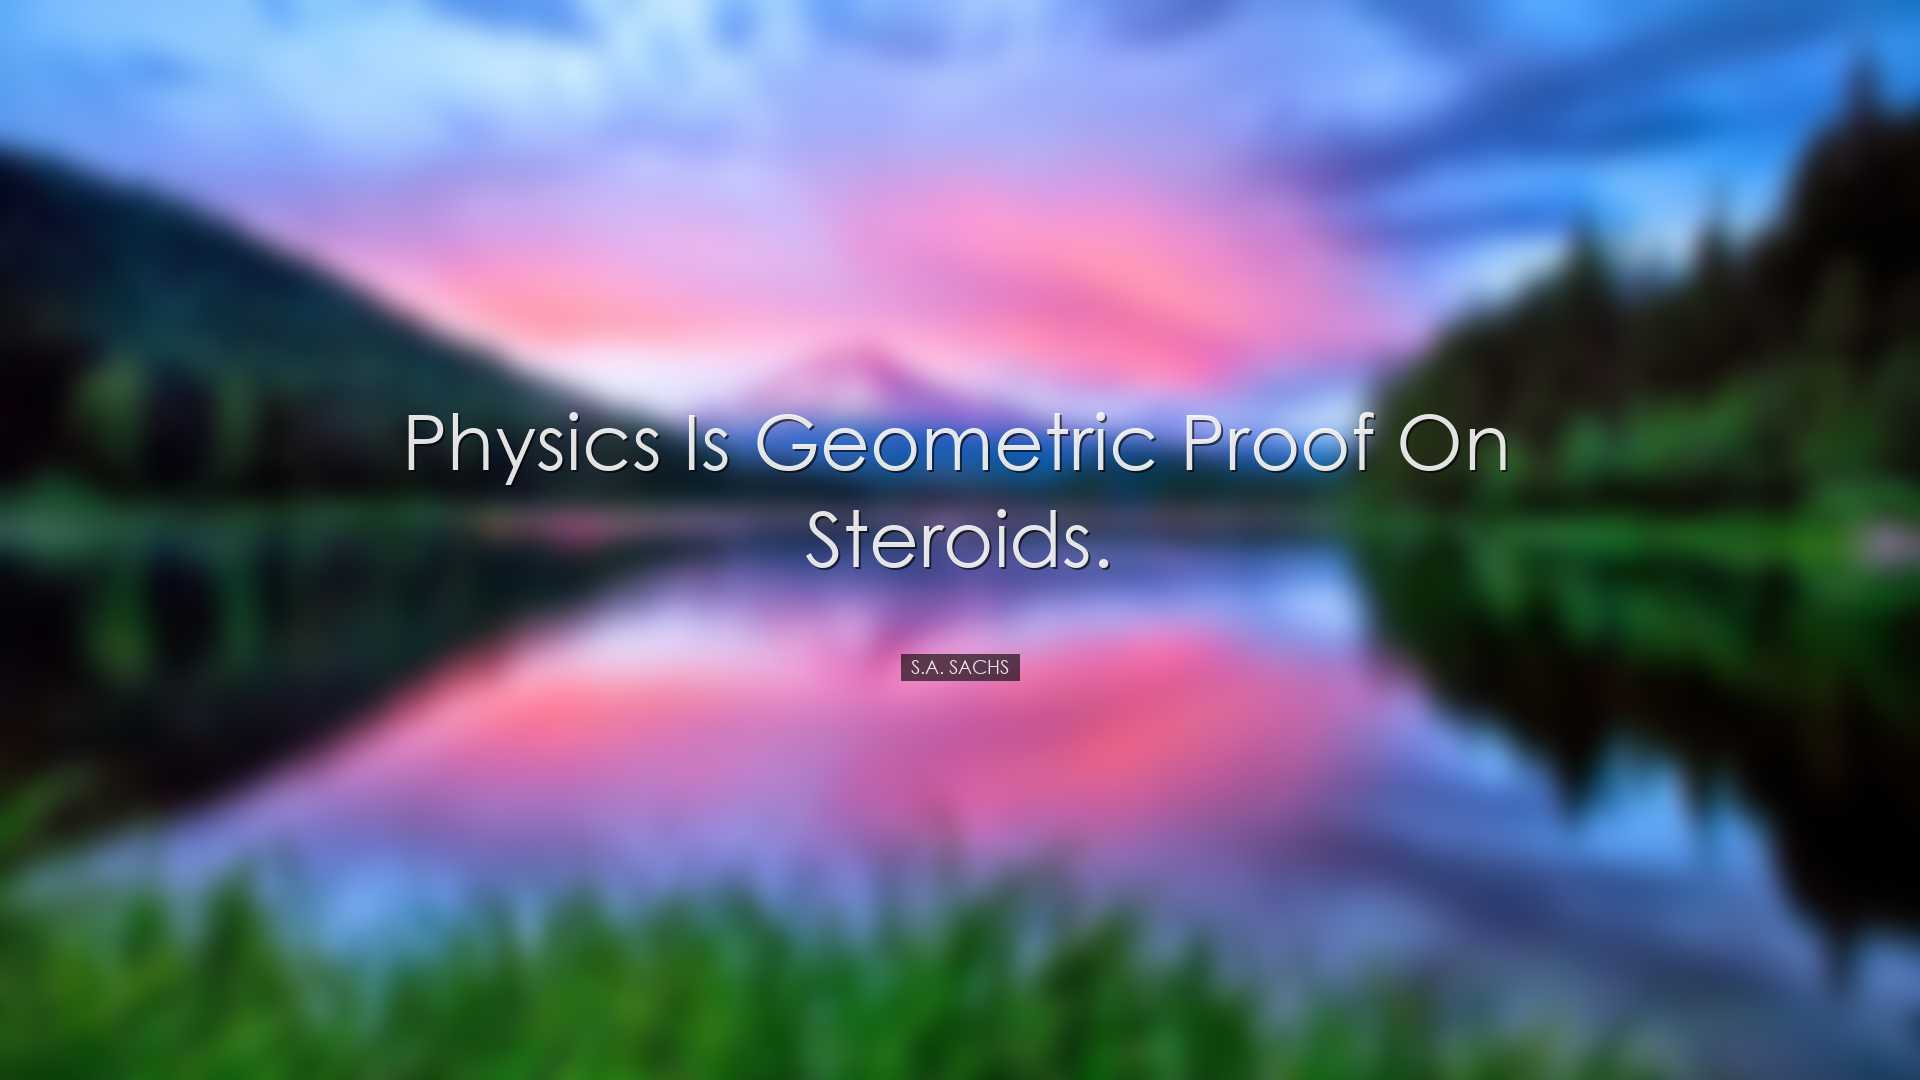 Physics is geometric proof on steroids. - S.A. Sachs